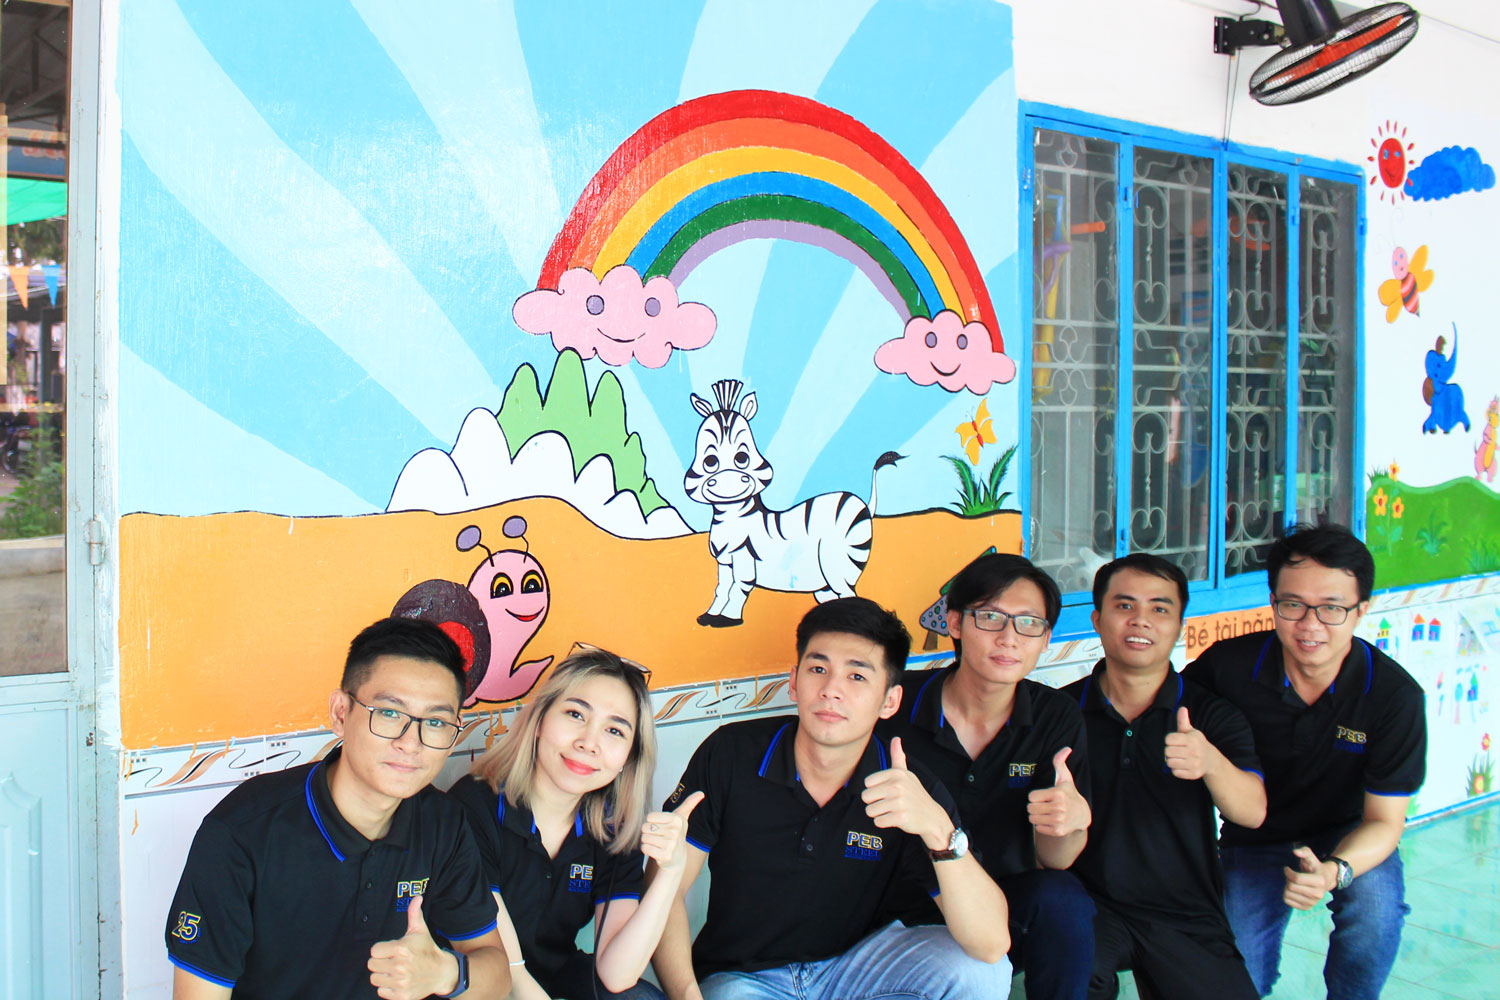 PEB Staff helped the teachers paint the classroom walls with colorful pictures.